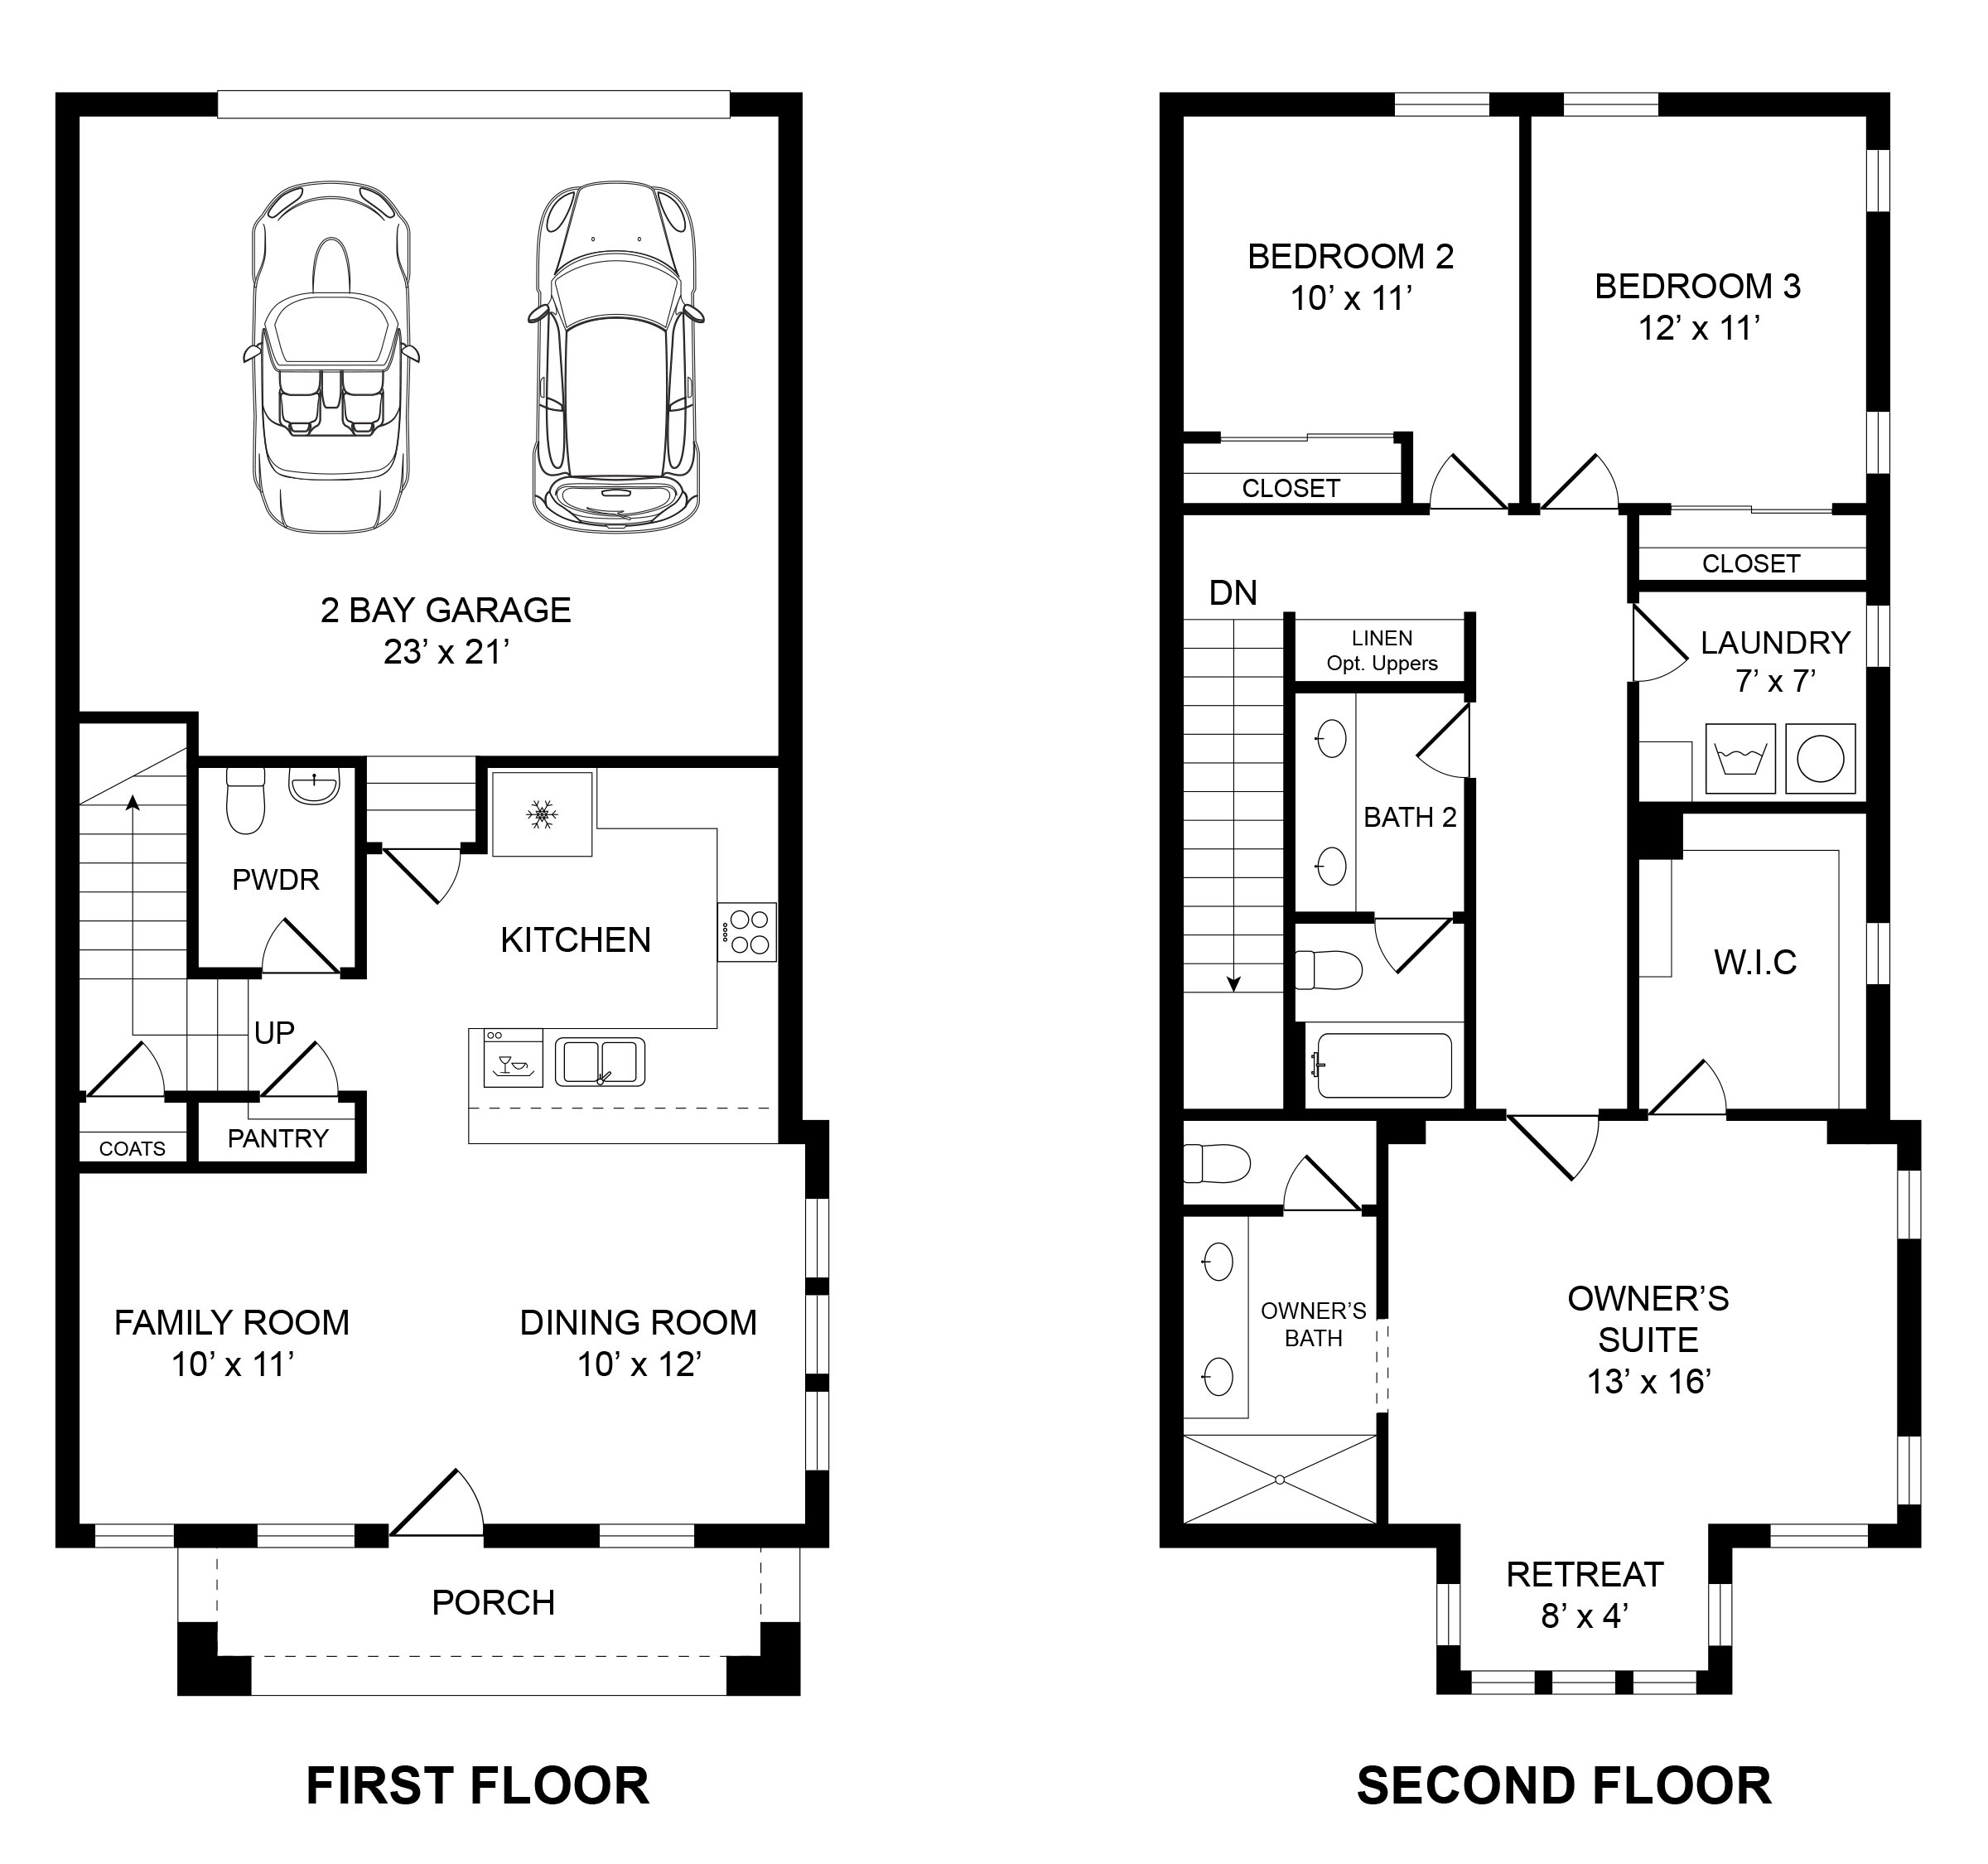 Floor Plan preview - click to open PDF